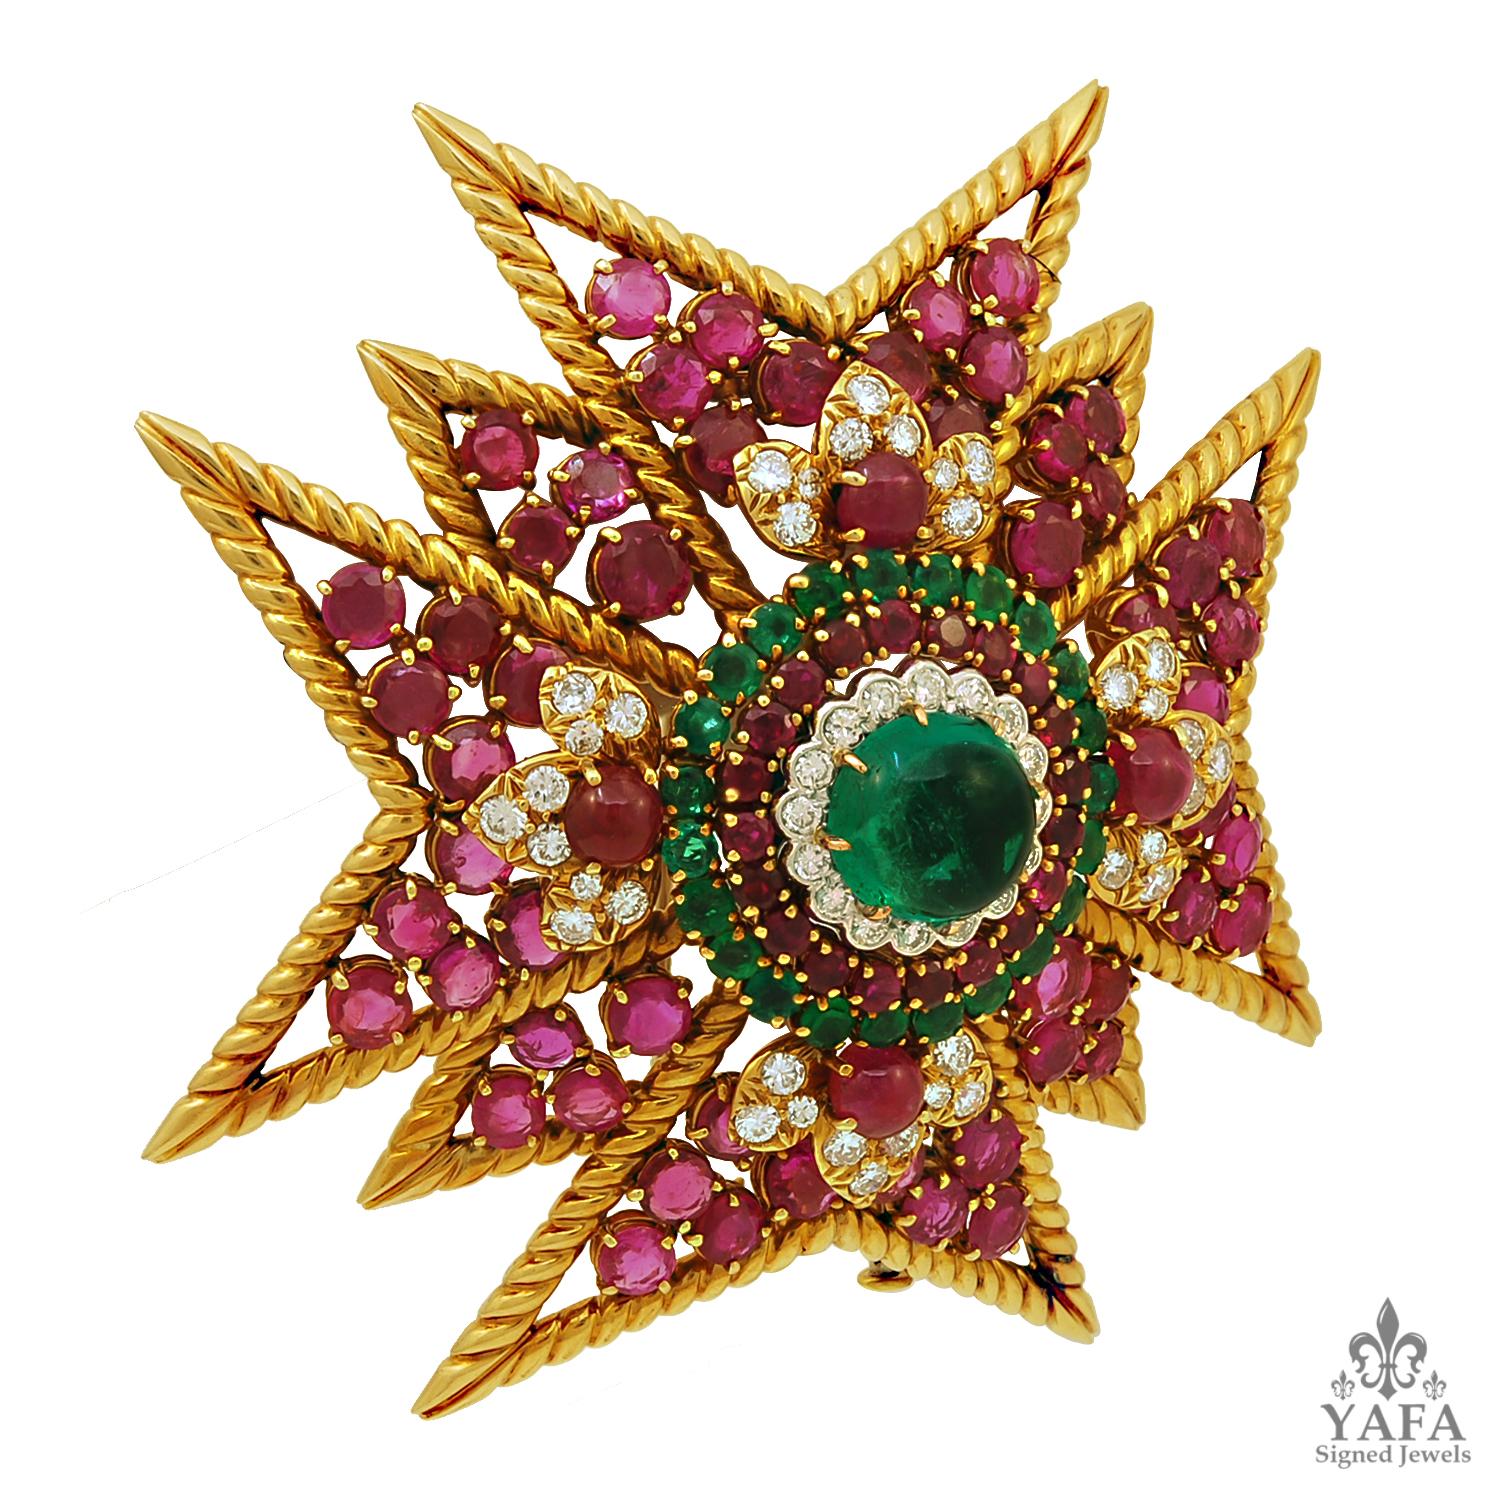 DAVID WEBB Emerald, Ruby & Diamond Maltese Brooch
David Webb Vintage 1970s Emerald Ruby  Diamond Gold Palm Beach Stye Maltese Pin
Designed as a stylized Maltese cross, centering a cabochon emerald, further decorated with round emeralds and rubies,